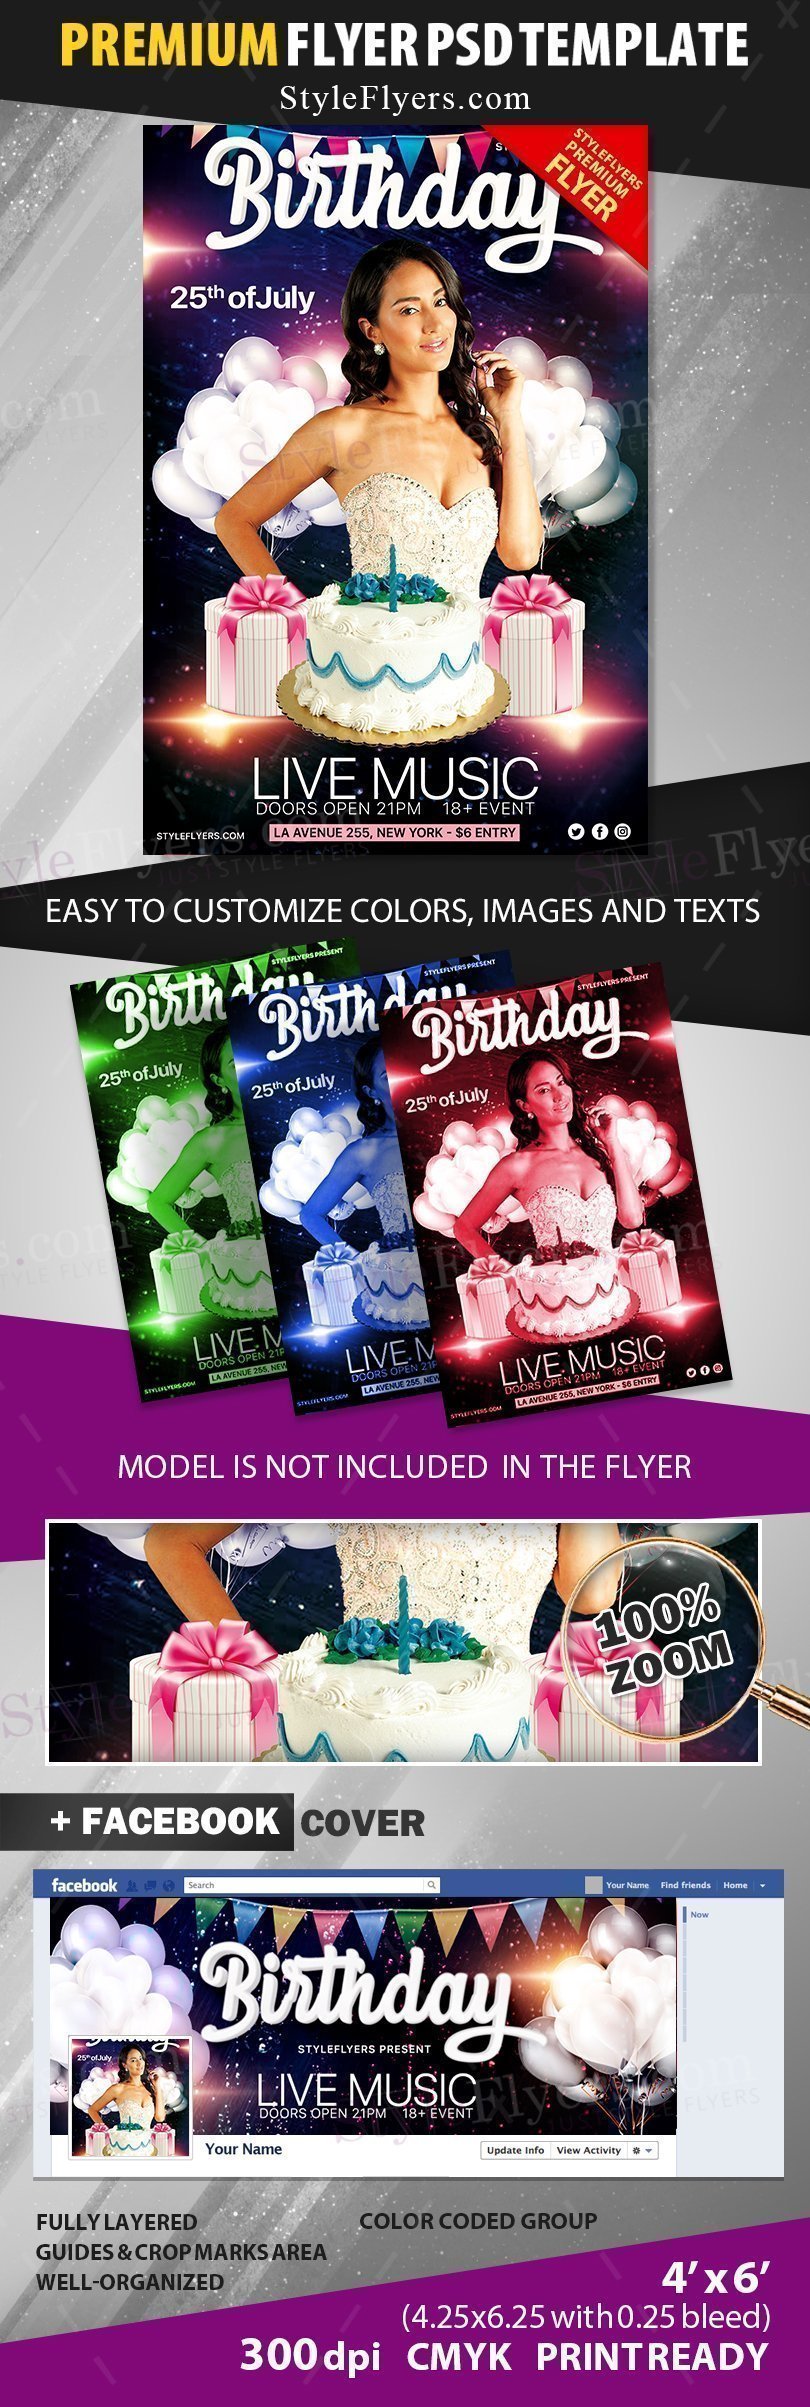 preview_Birthday-party_psd_flyer